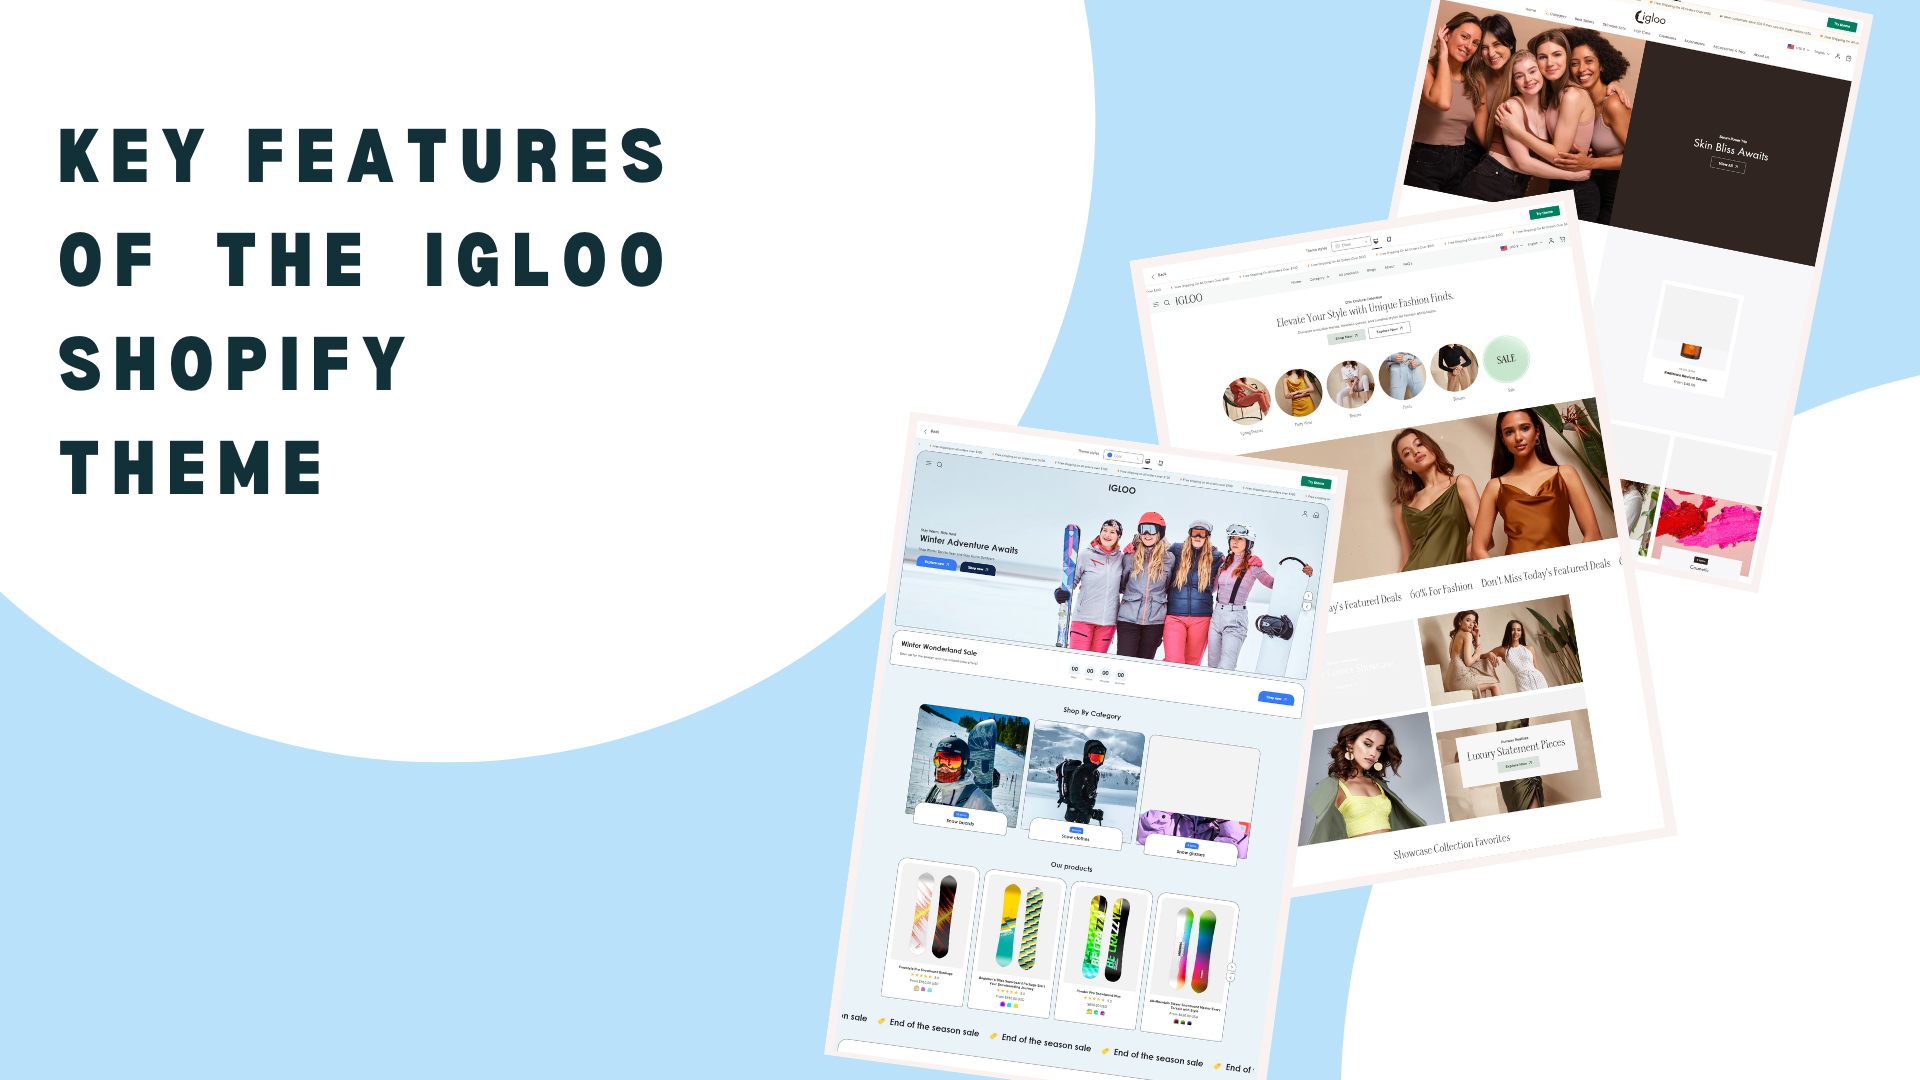 Key Features of the Igloo Shopify Theme